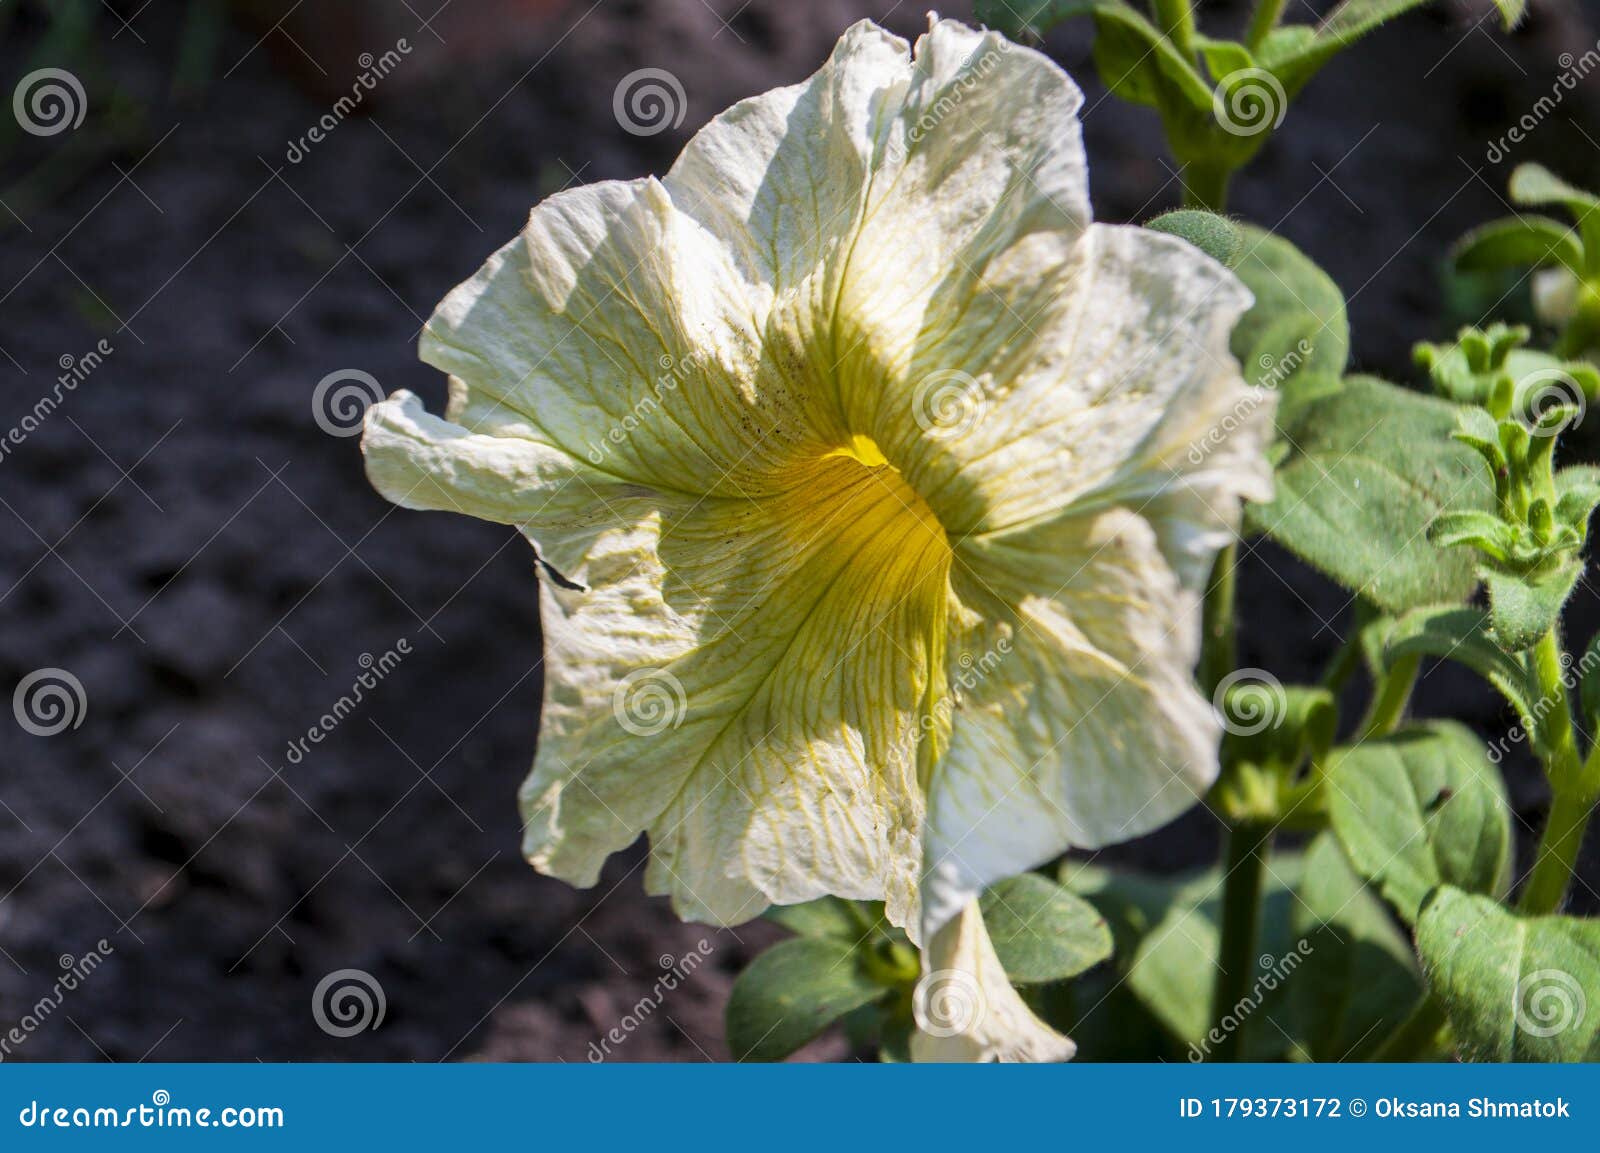 Tender White And Yellow Petunia Flowers Are Blossom In The Garden On The Dark Background Stock Photo Image Of Flavour Essence 179373172